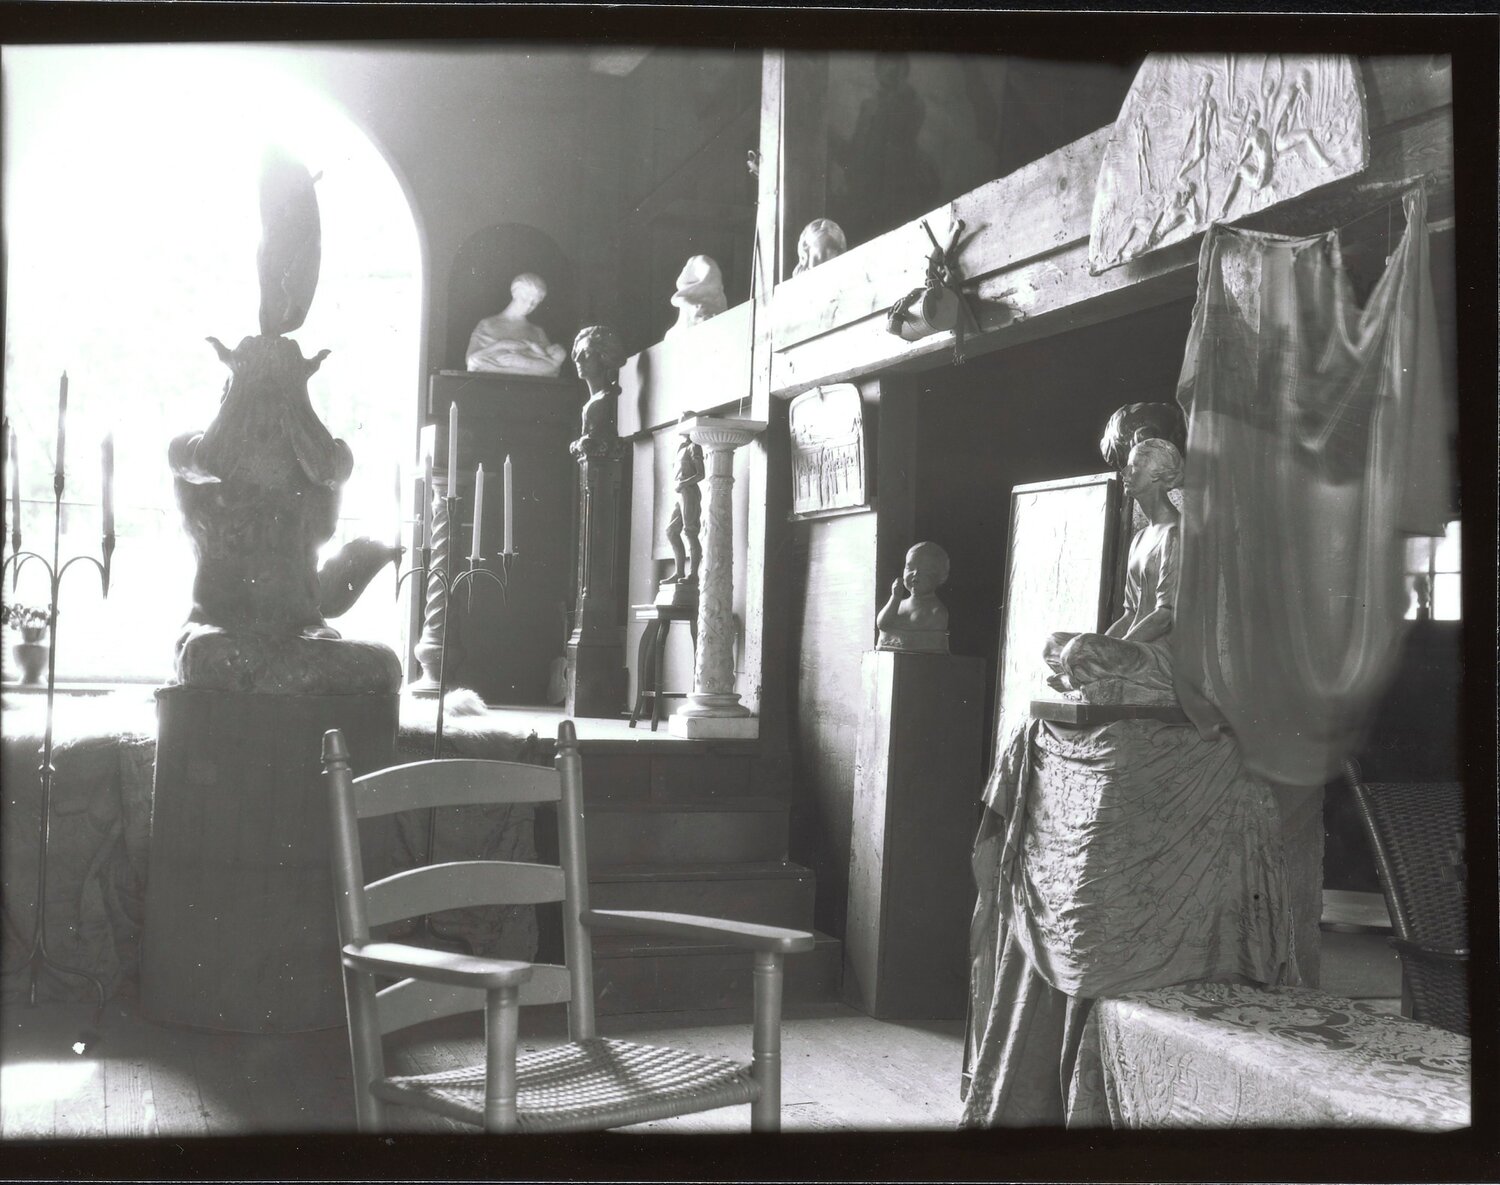 Anna Coleman Ladd’s Beverly Farms studio, where she created over 20 sculptures and fountains commissioned by friends and neighbors.